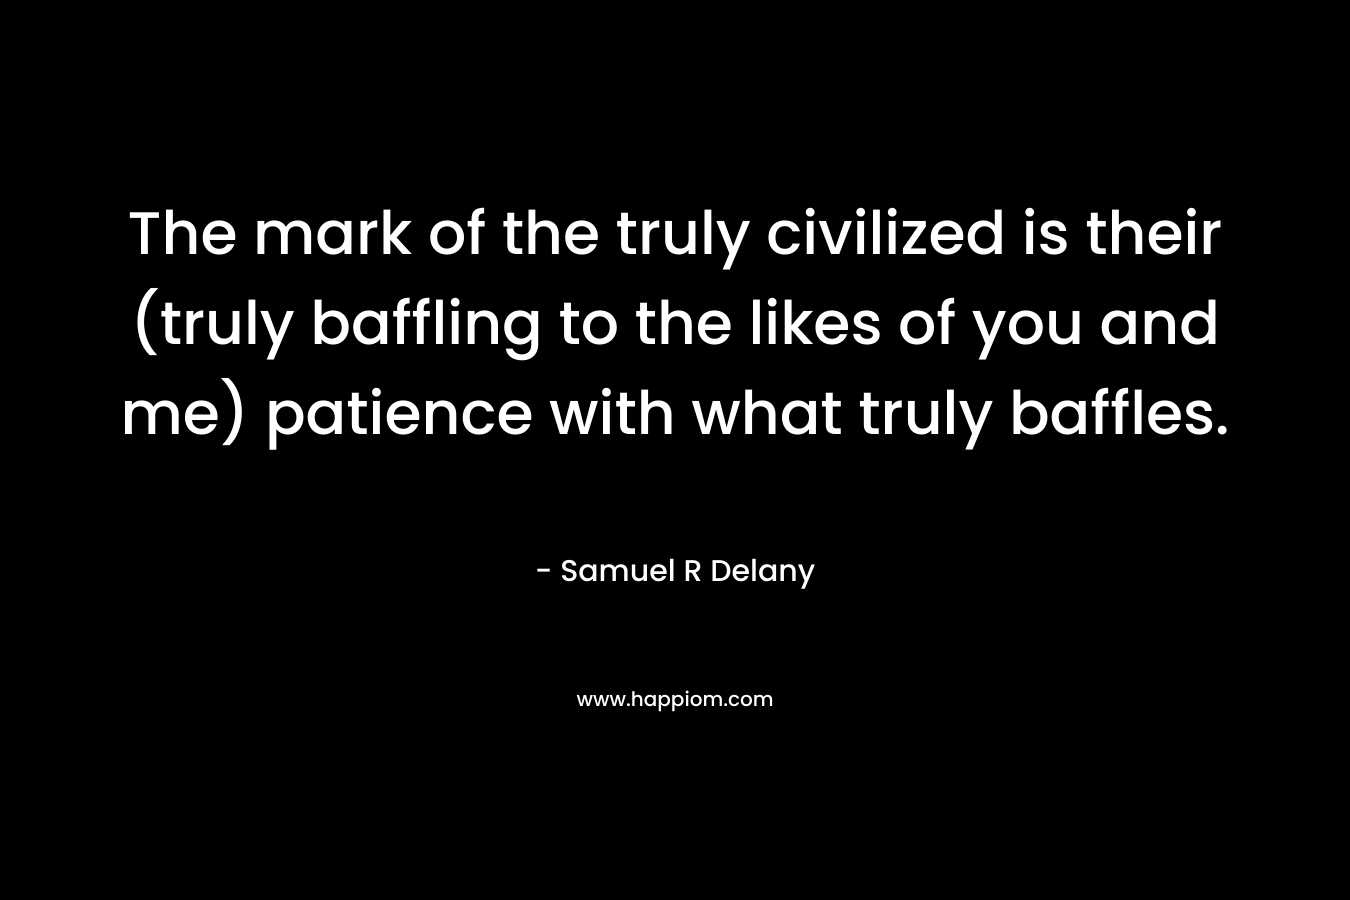 The mark of the truly civilized is their (truly baffling to the likes of you and me) patience with what truly baffles.